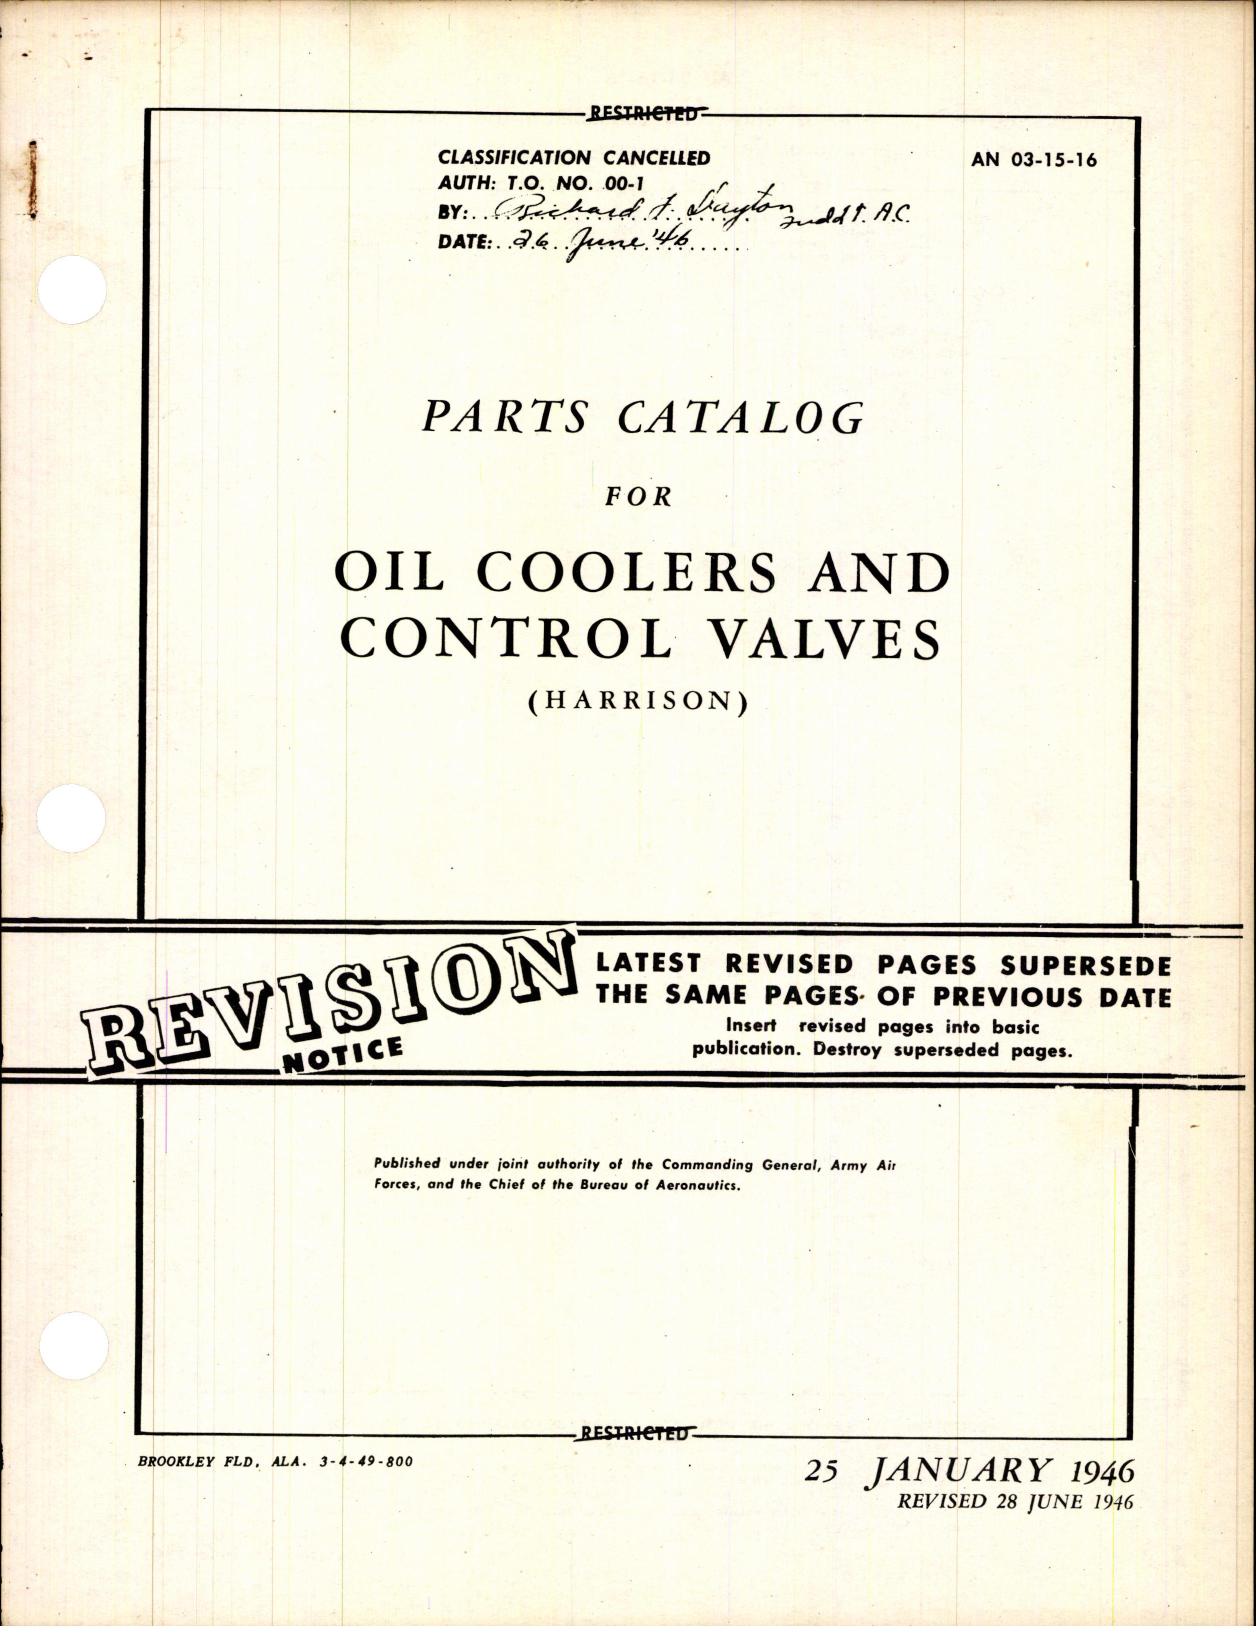 Sample page 1 from AirCorps Library document: Parts Catalog for Oil Coolers and Control Valves